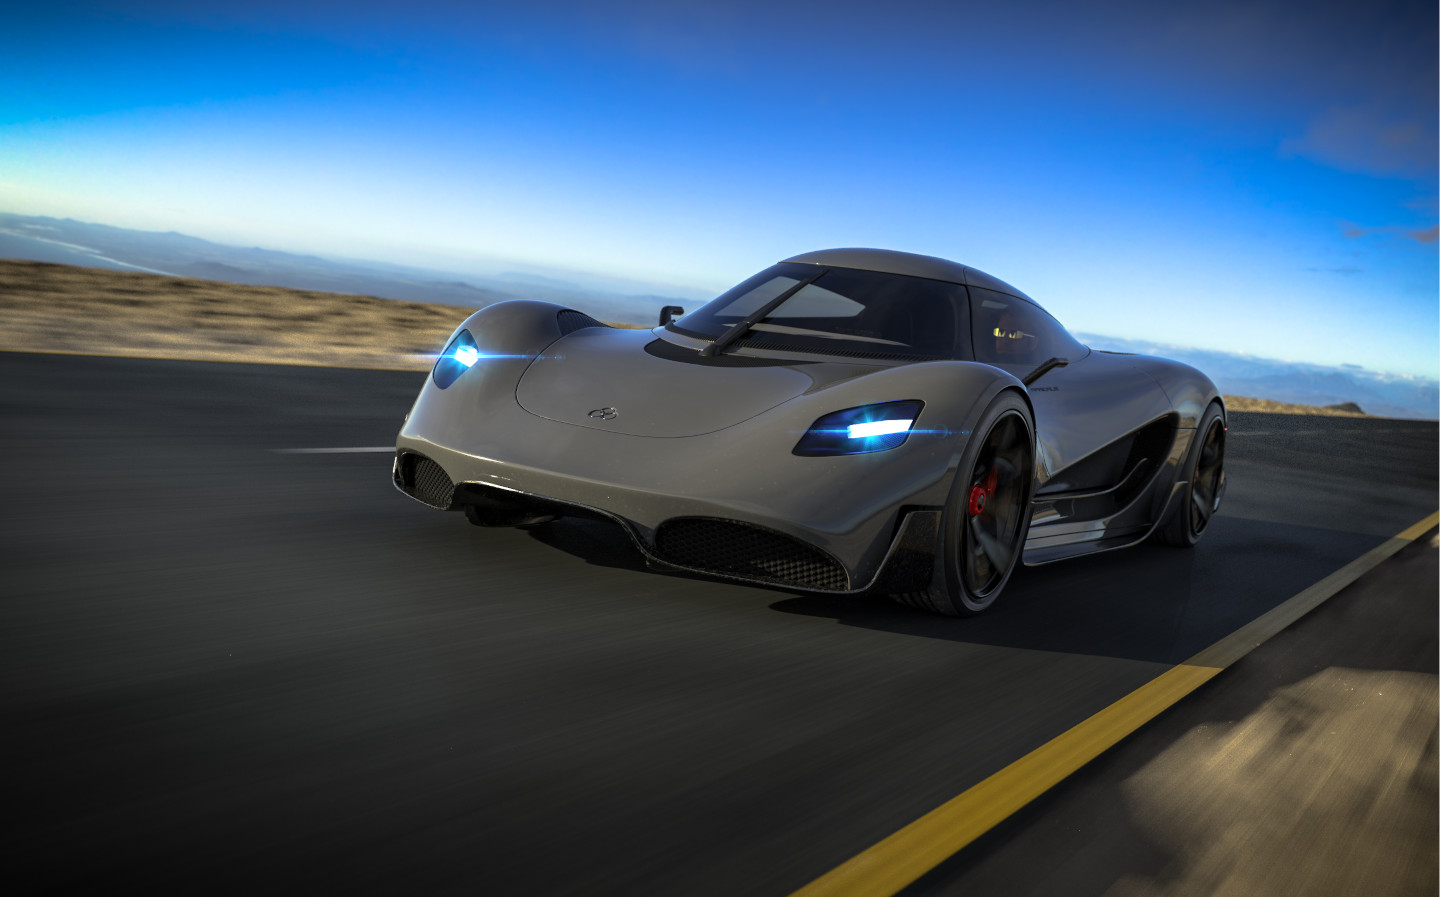 Hydrogen hypercar with 1,100bhp to be made in Warwickshire